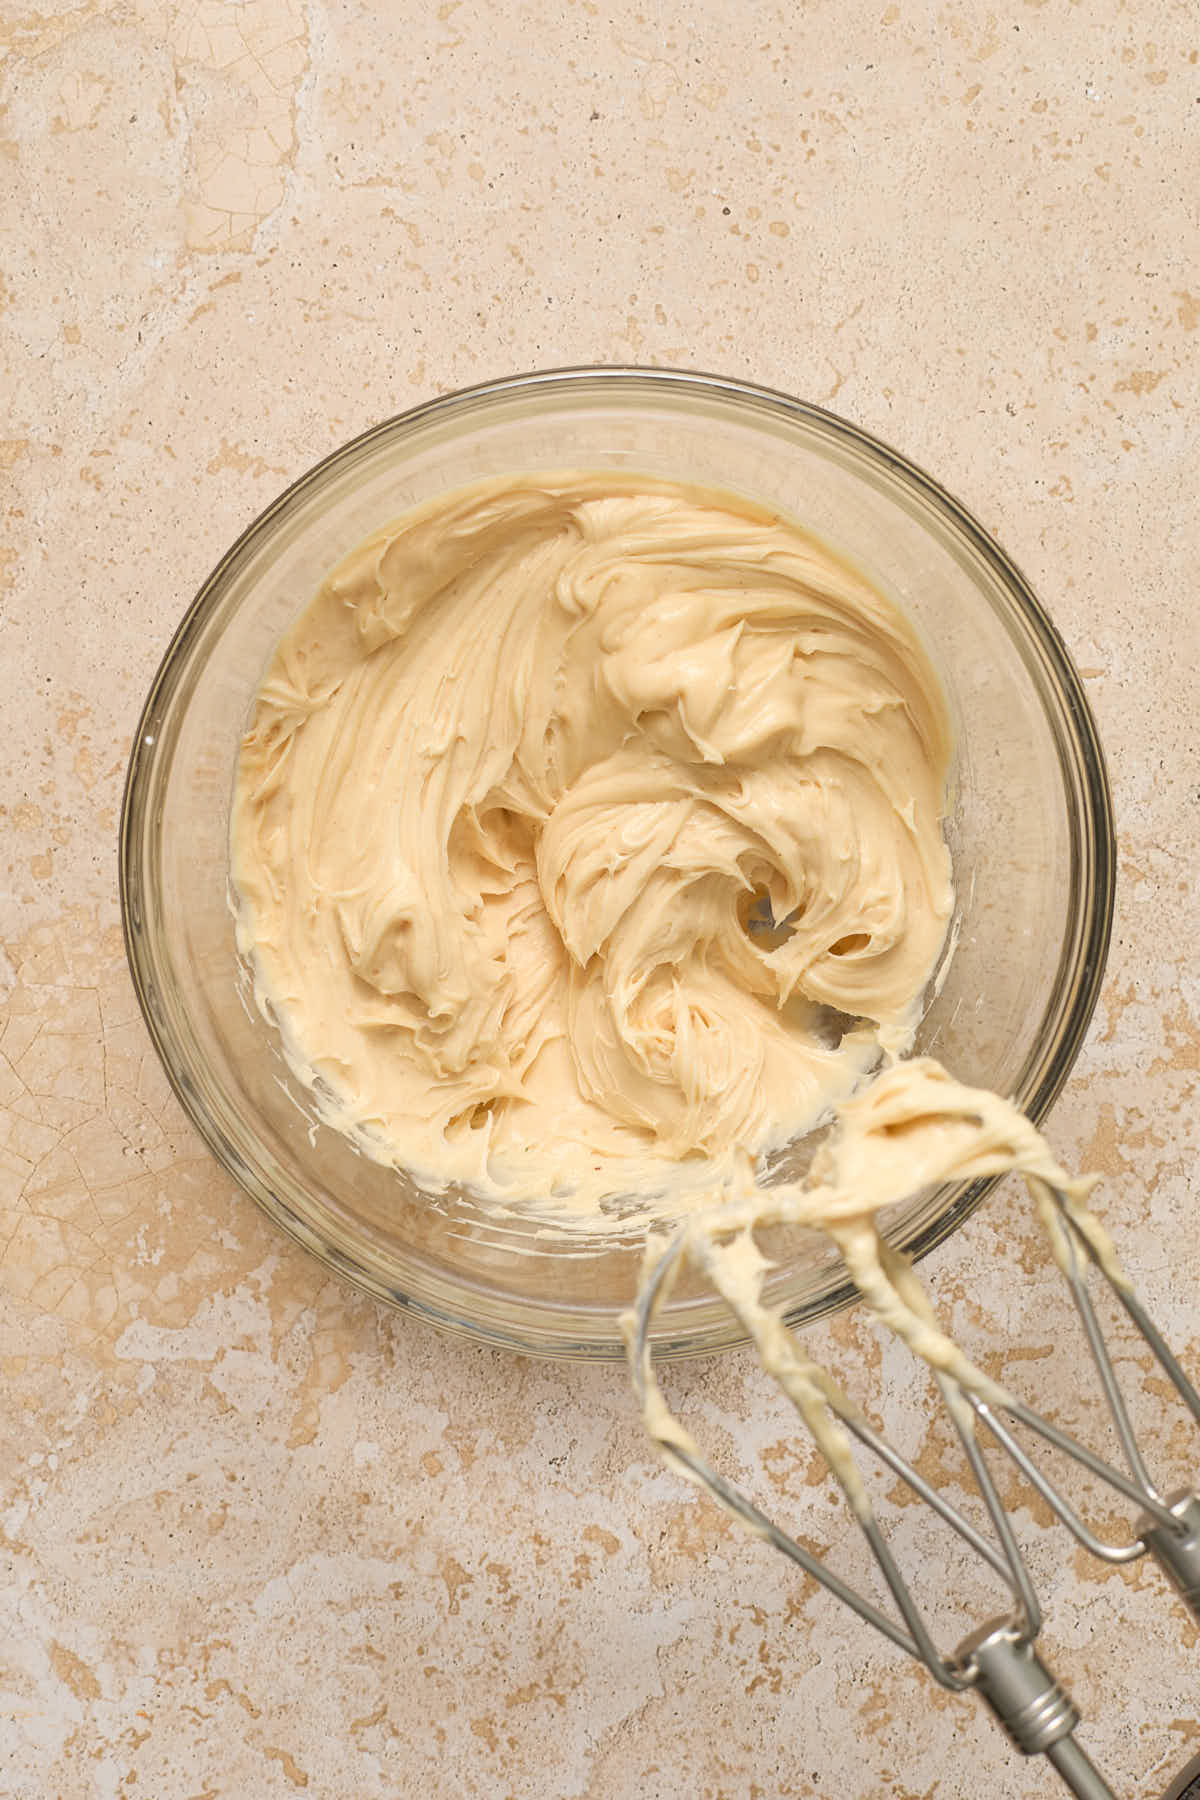 Peanut butter cream cheese frosting mixed together in a glass bowl.